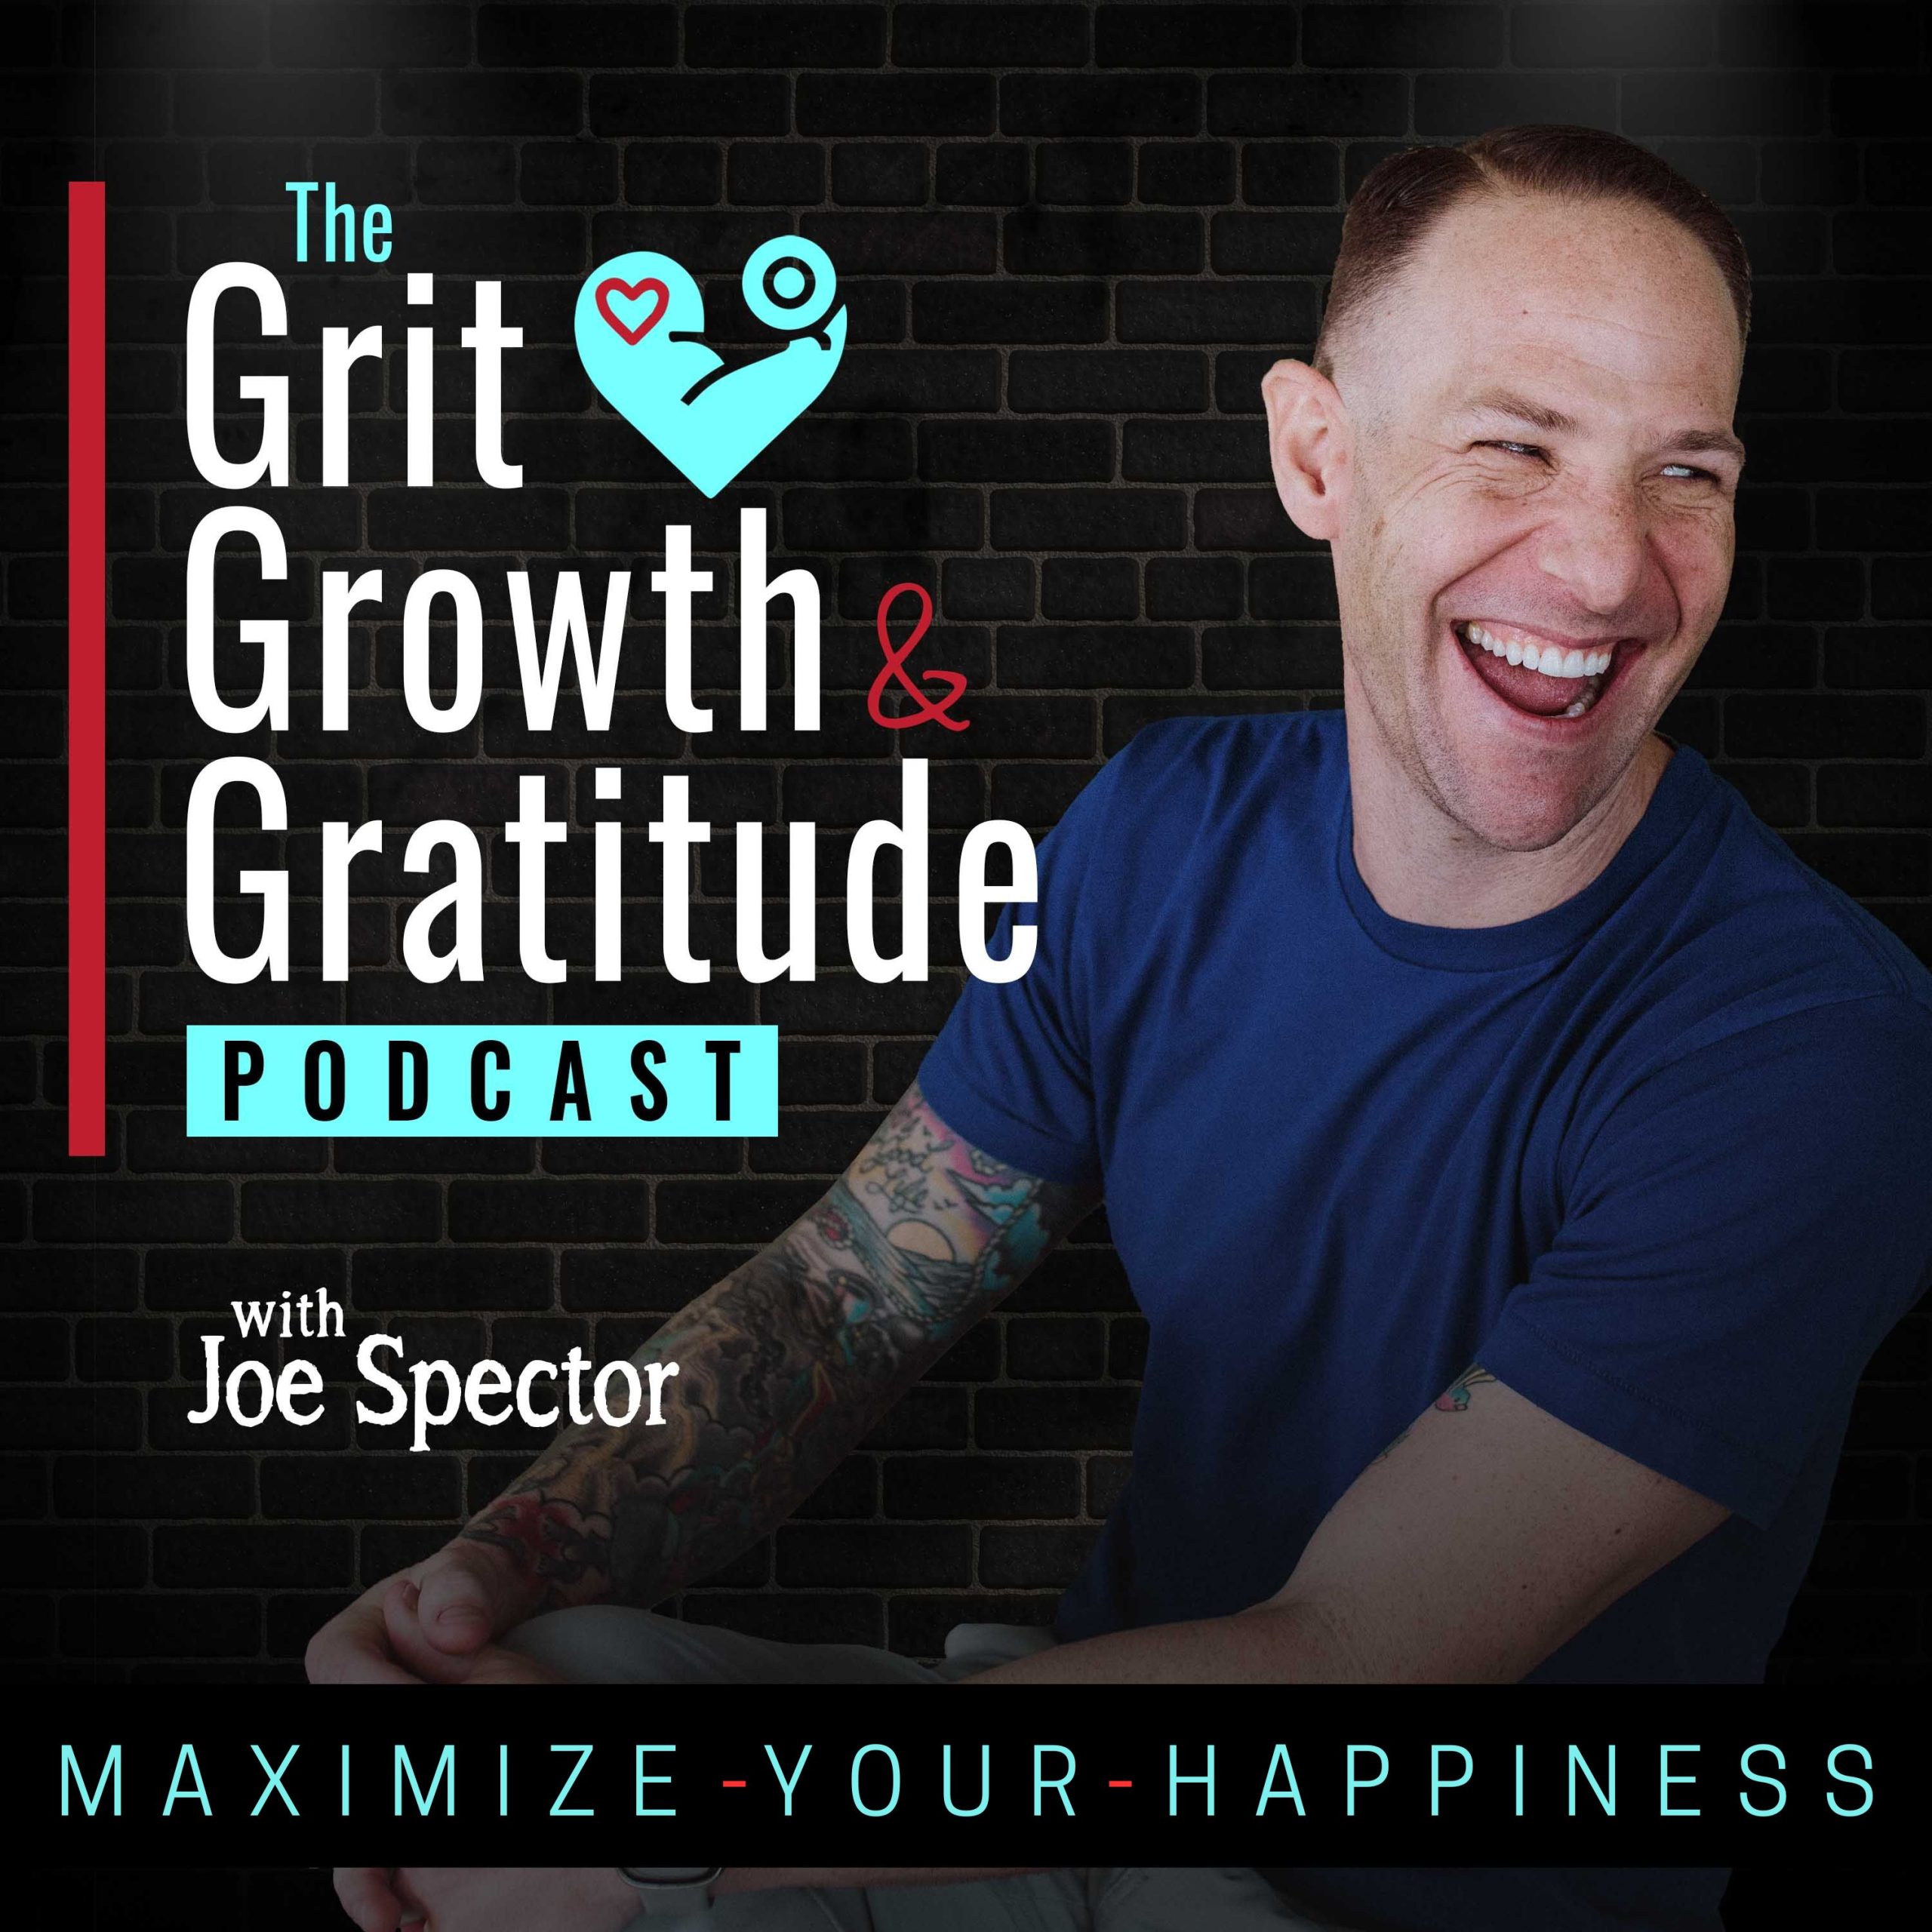 The Grit, Growth & Gratitude Podcast